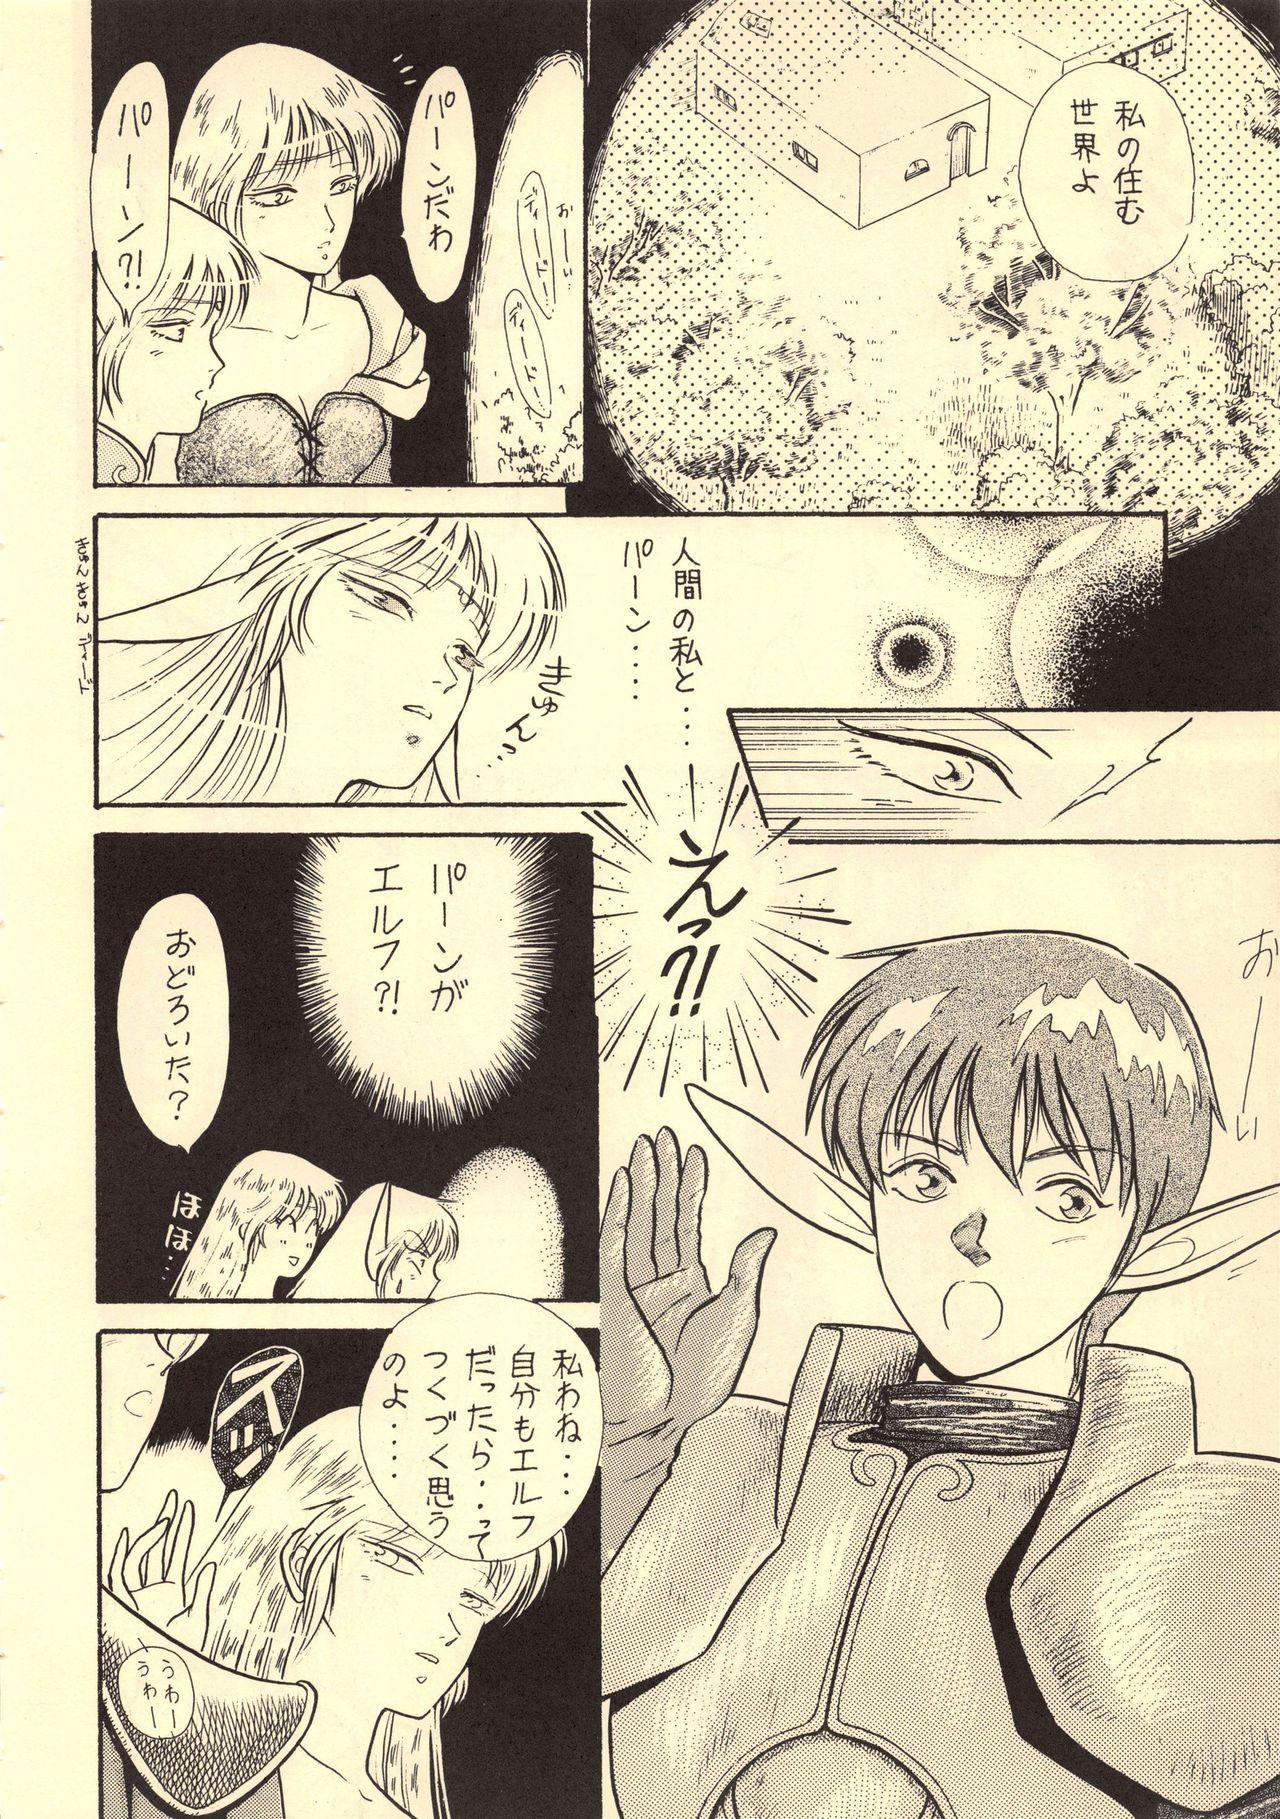 Dick Sucking Porn Elf no Musume Kaiteiban - Die Elfische Tochter revised edition - Record of lodoss war Farting - Page 10